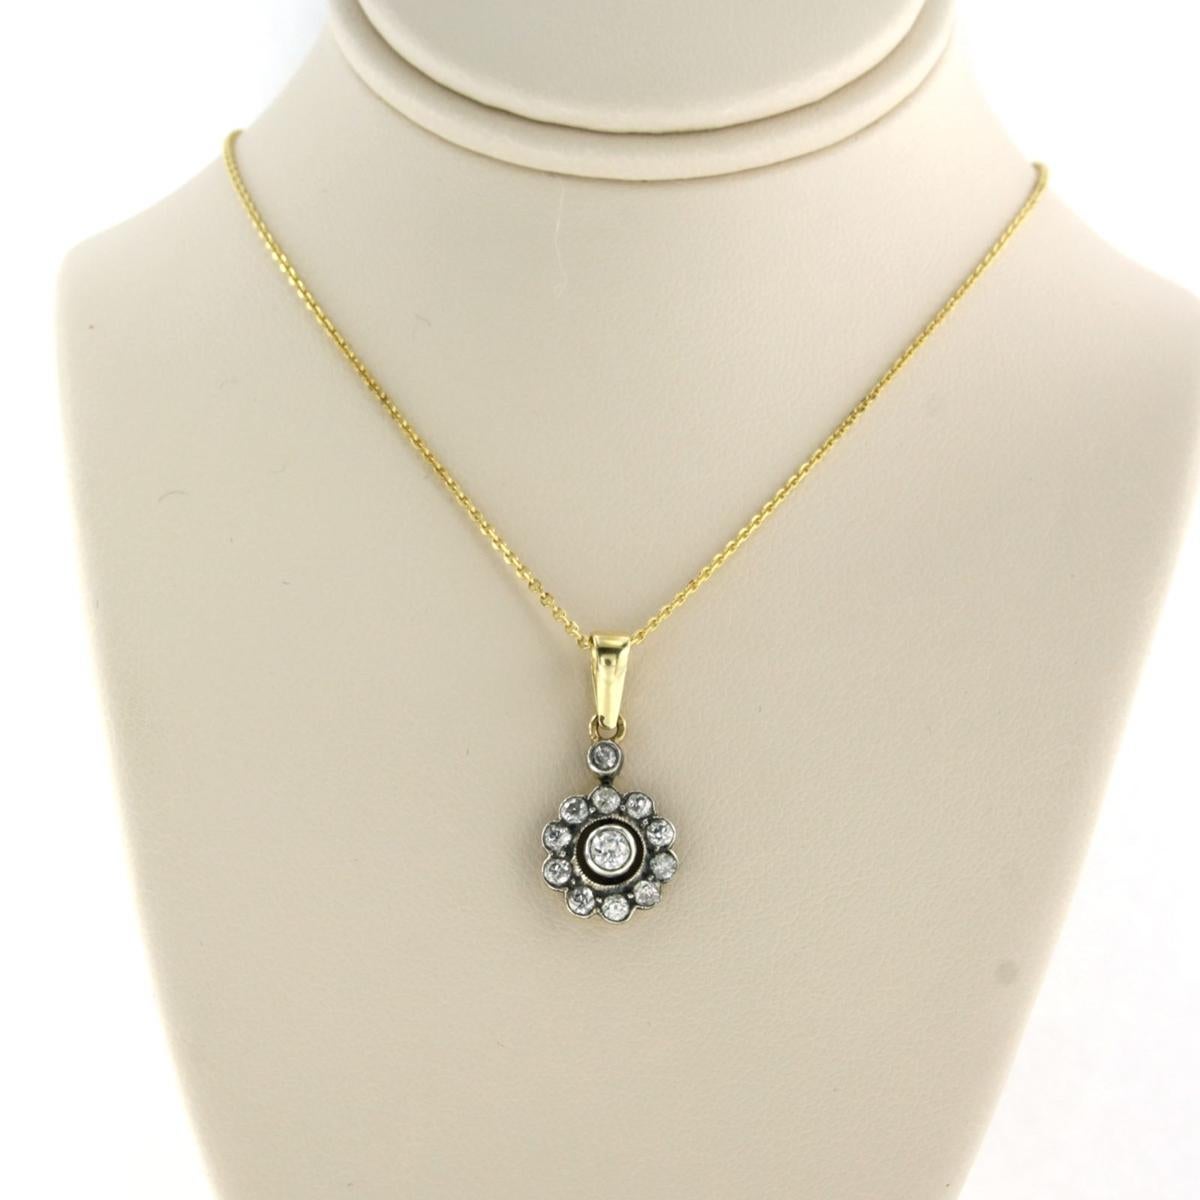 14k yellow gold necklace with a gold and silver pendant with old mine cut diamonds. 0.70ct - 45cm long

detailed description:

the length of the necklace is 45 cm long and 0.8 mm wide

the size of the pendant is 2.2 cm long by 1.1 cm wide

weight